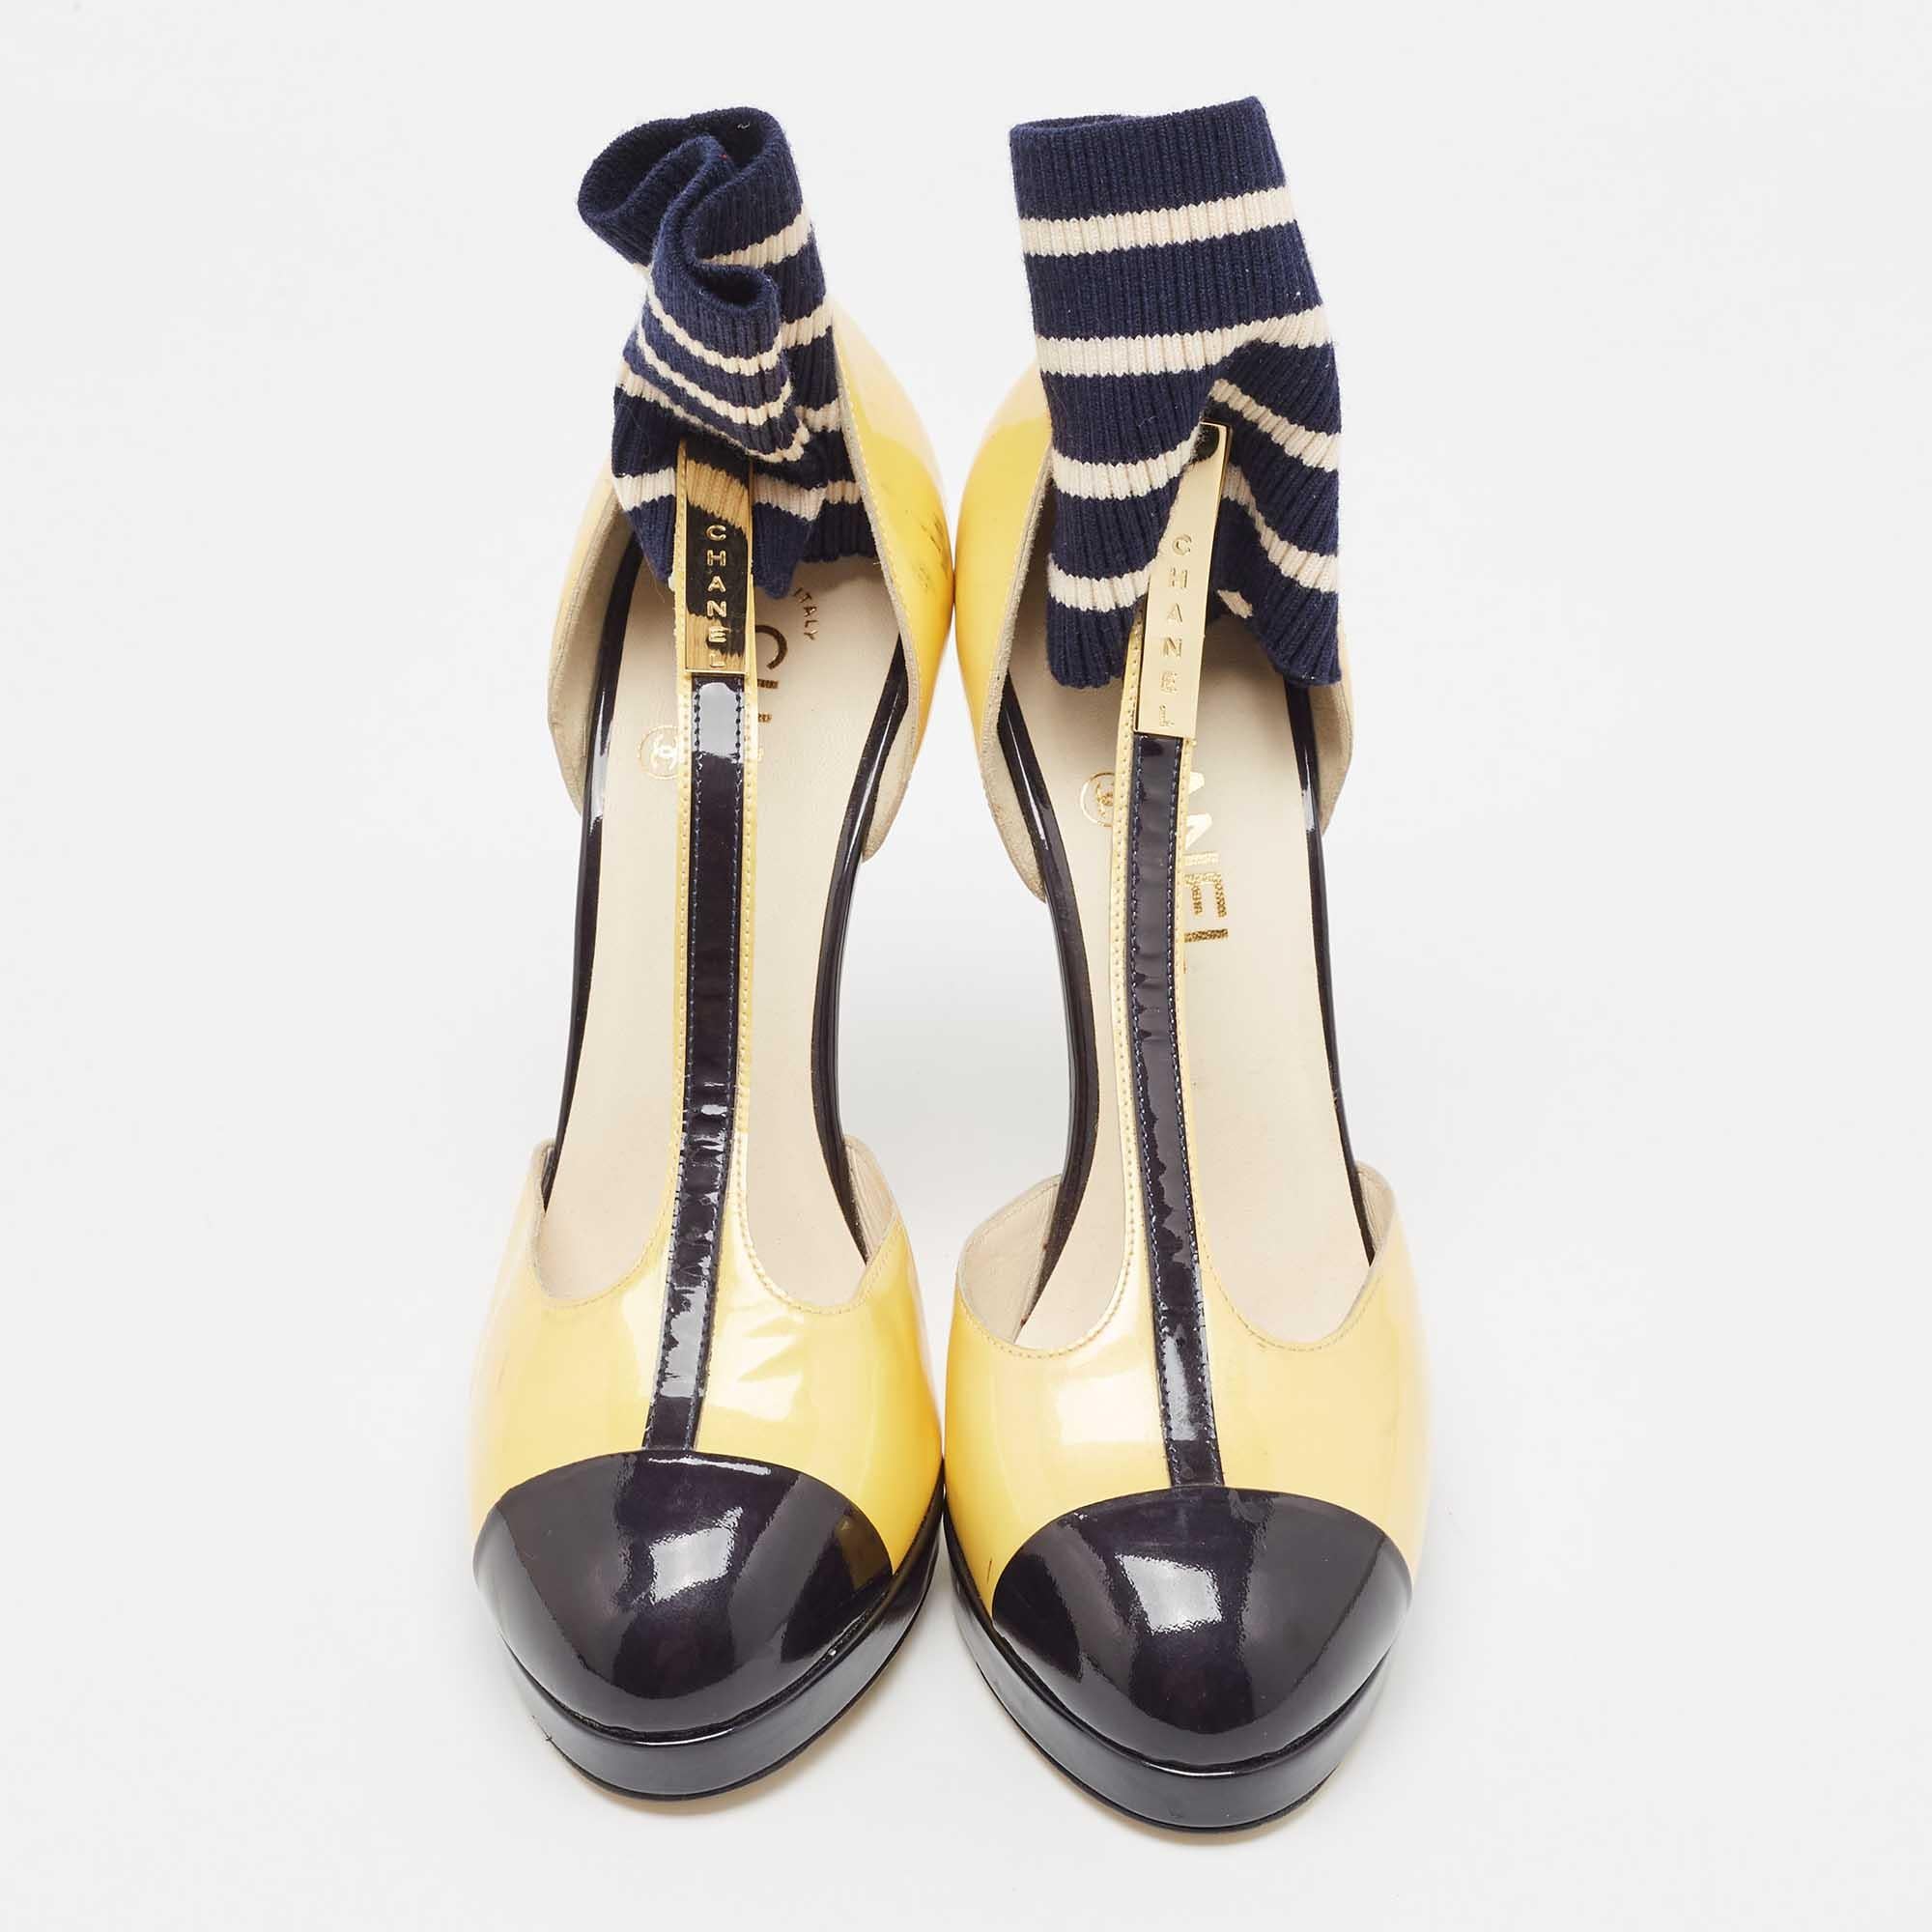 These pumps from Chanel feel like a dream and fit as if they have exclusively been crafted just for you. Look your stylish best every time you step out wearing these patent leather shoes. They feature ankle socks, cap toes and 14cm heels supported